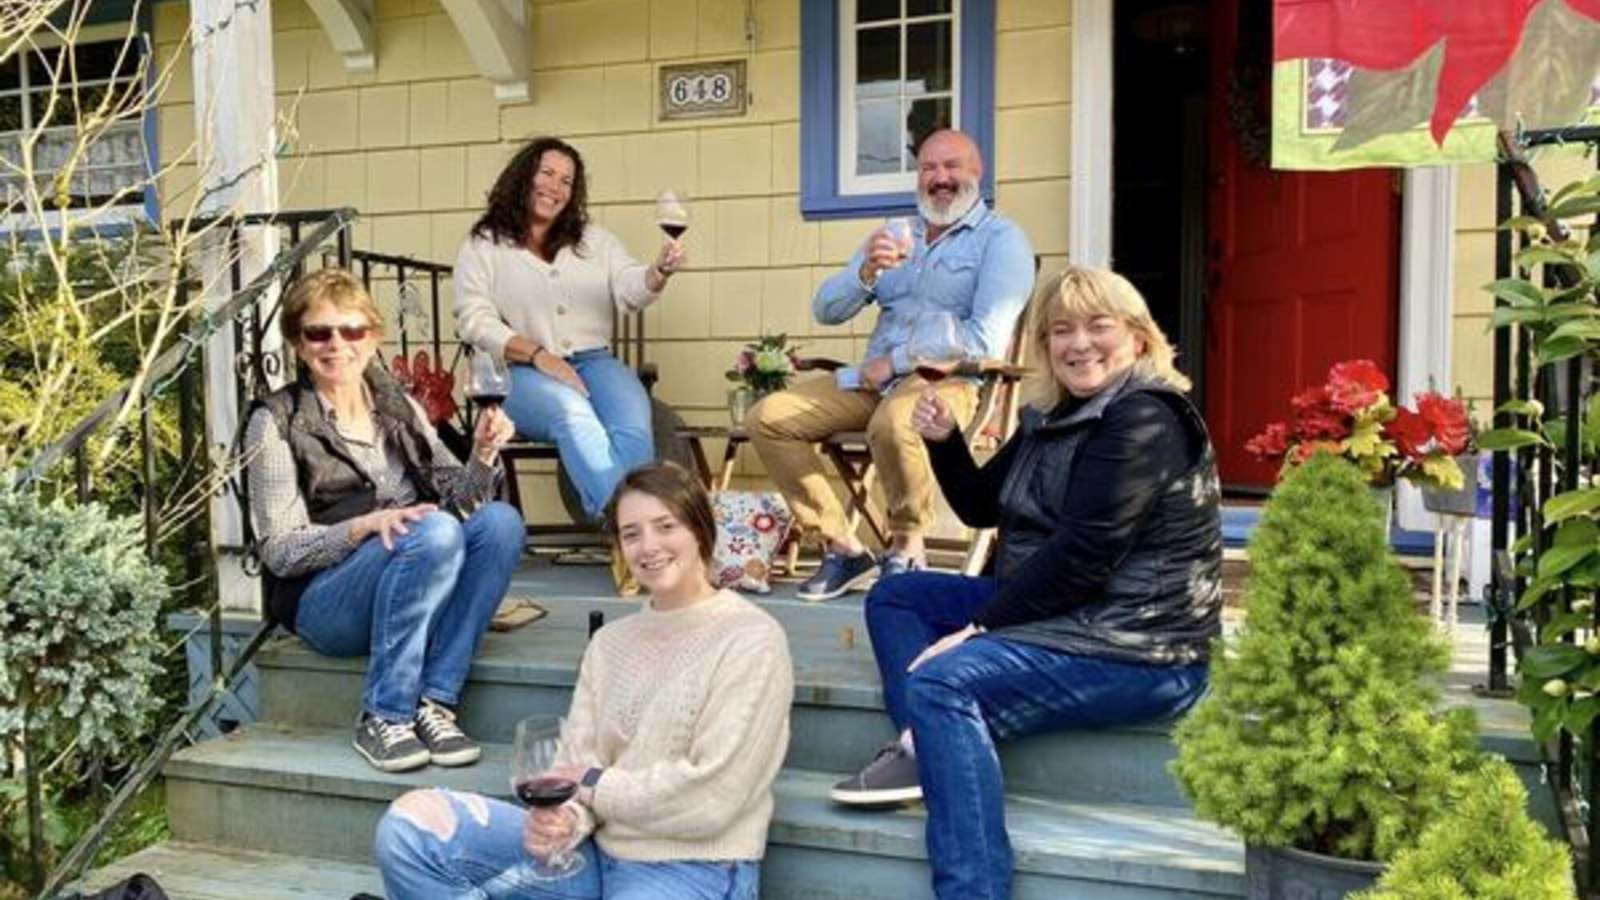 People smiling, holding wine glasses, and sitting on a front porch surrounded by greenery